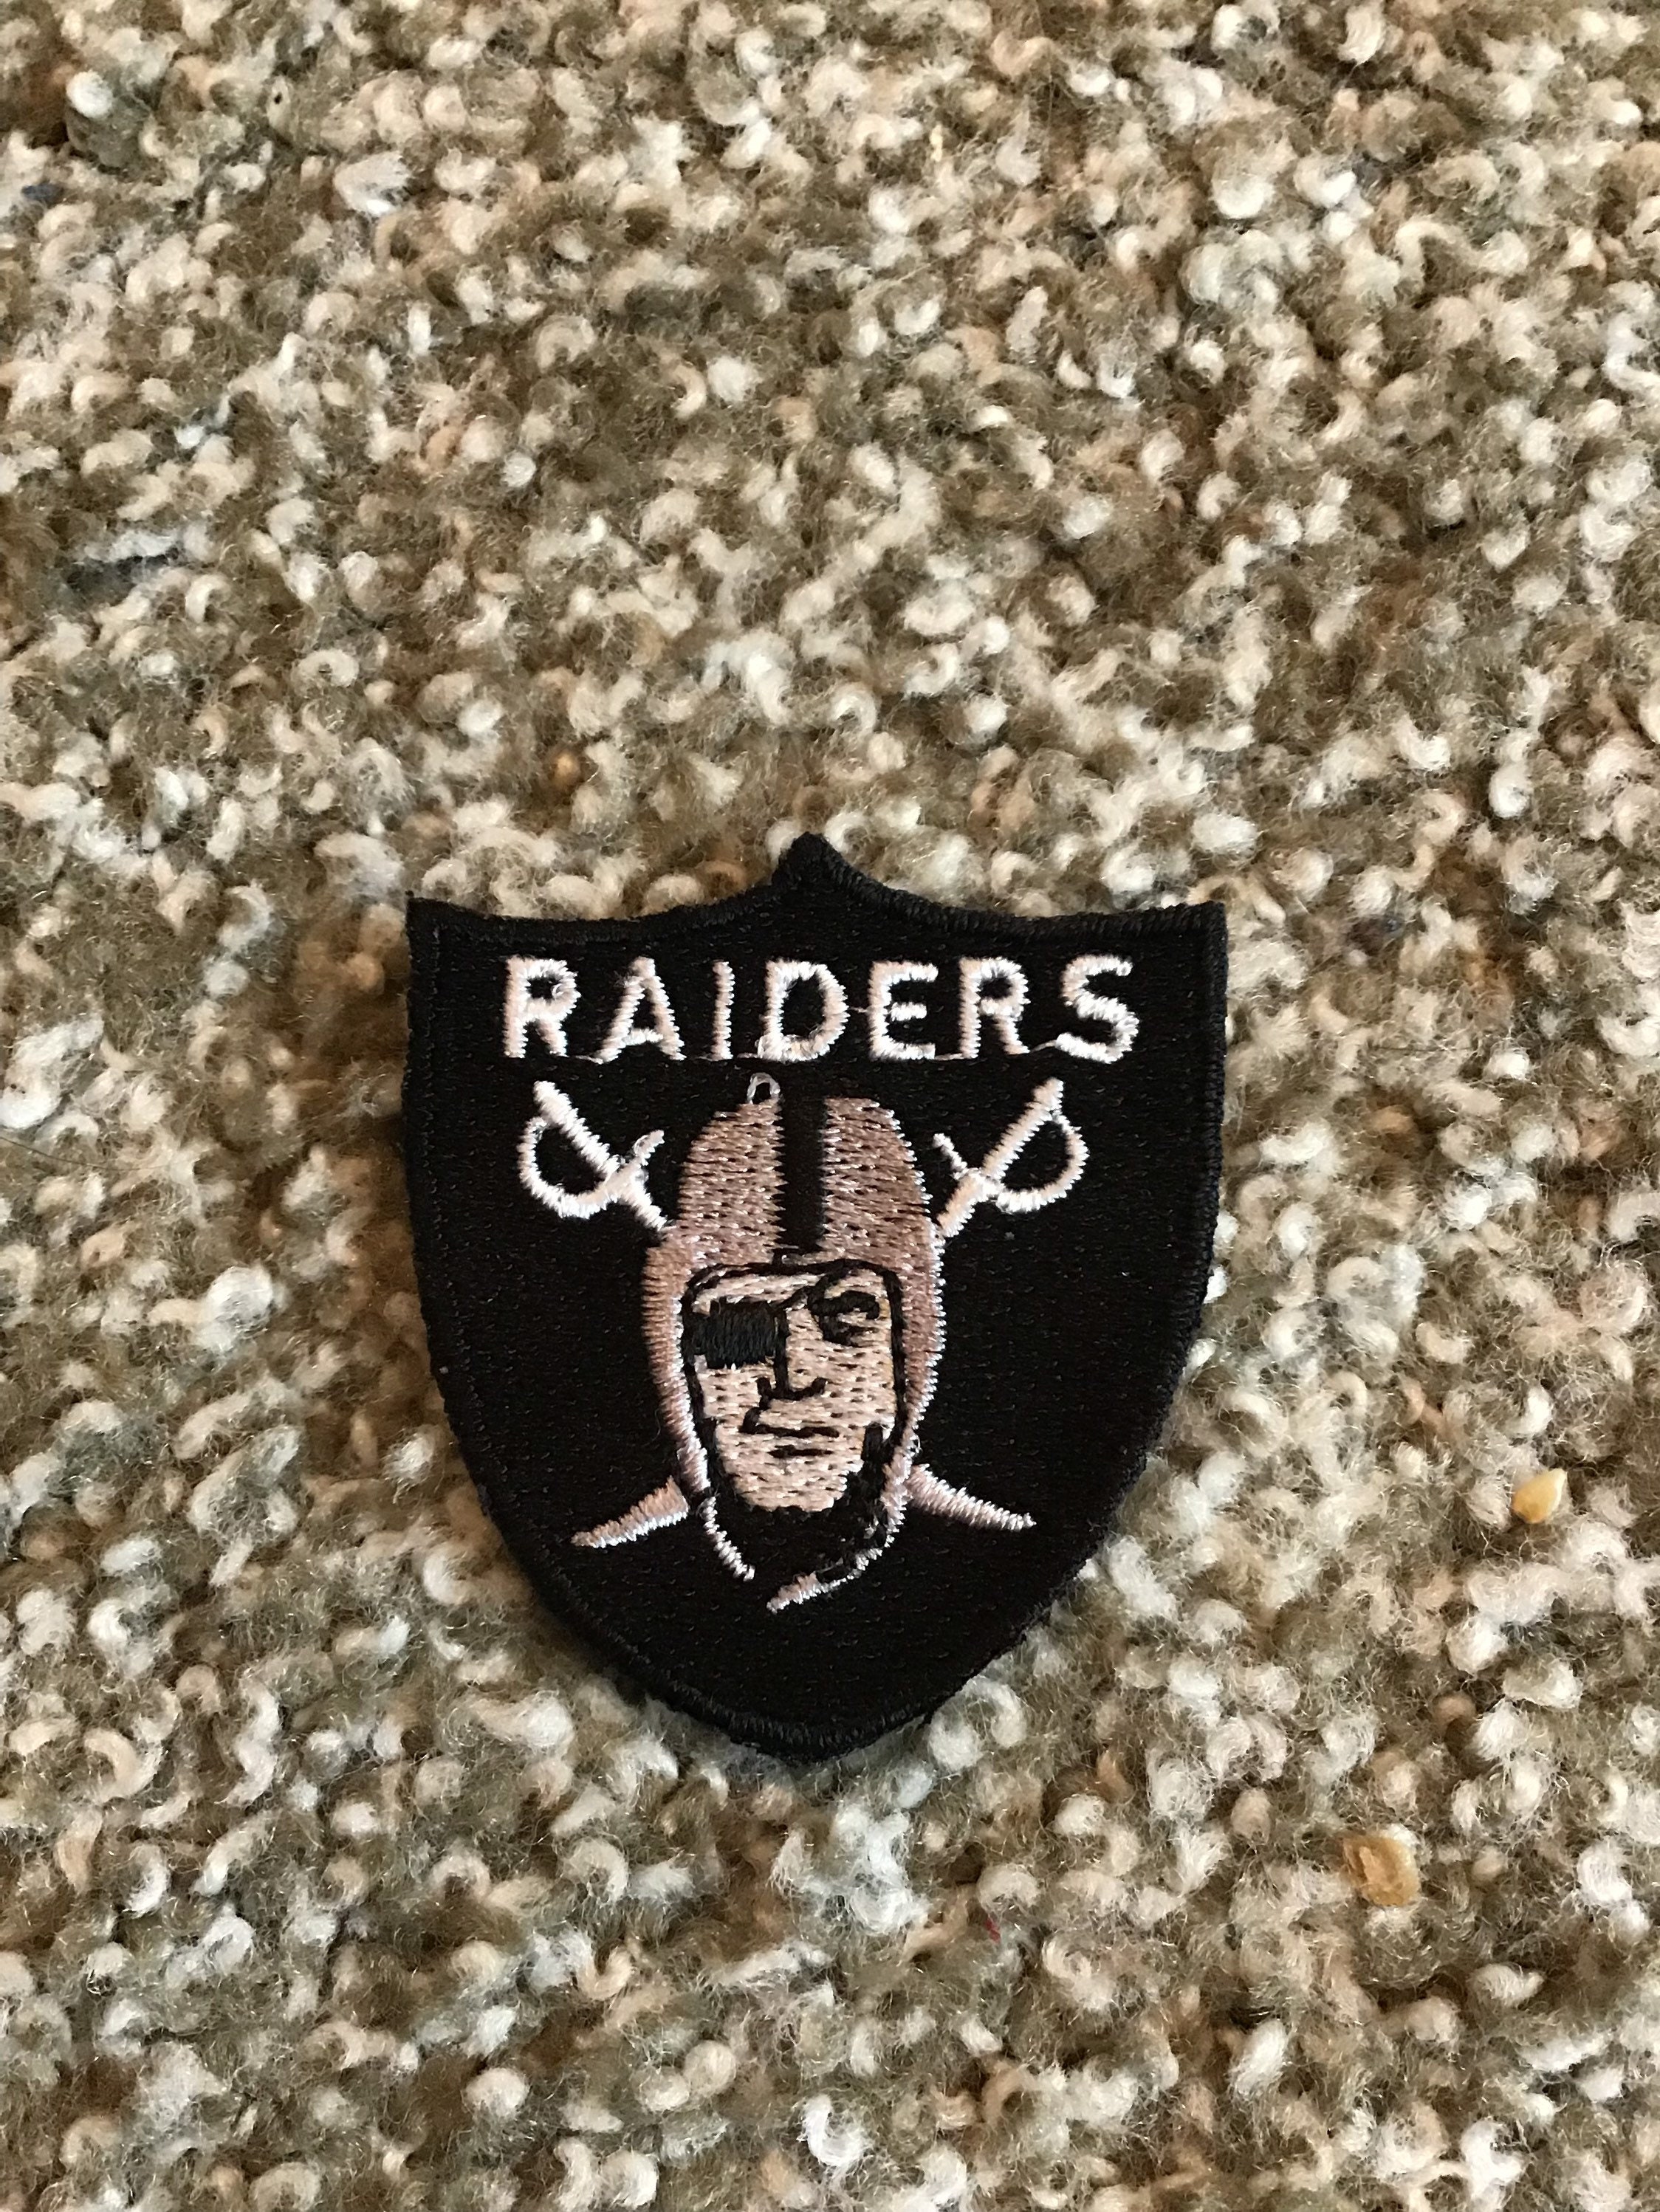 3 Raiders Patches Great Deal 3 For One Low Price Brand New Rare Awesome